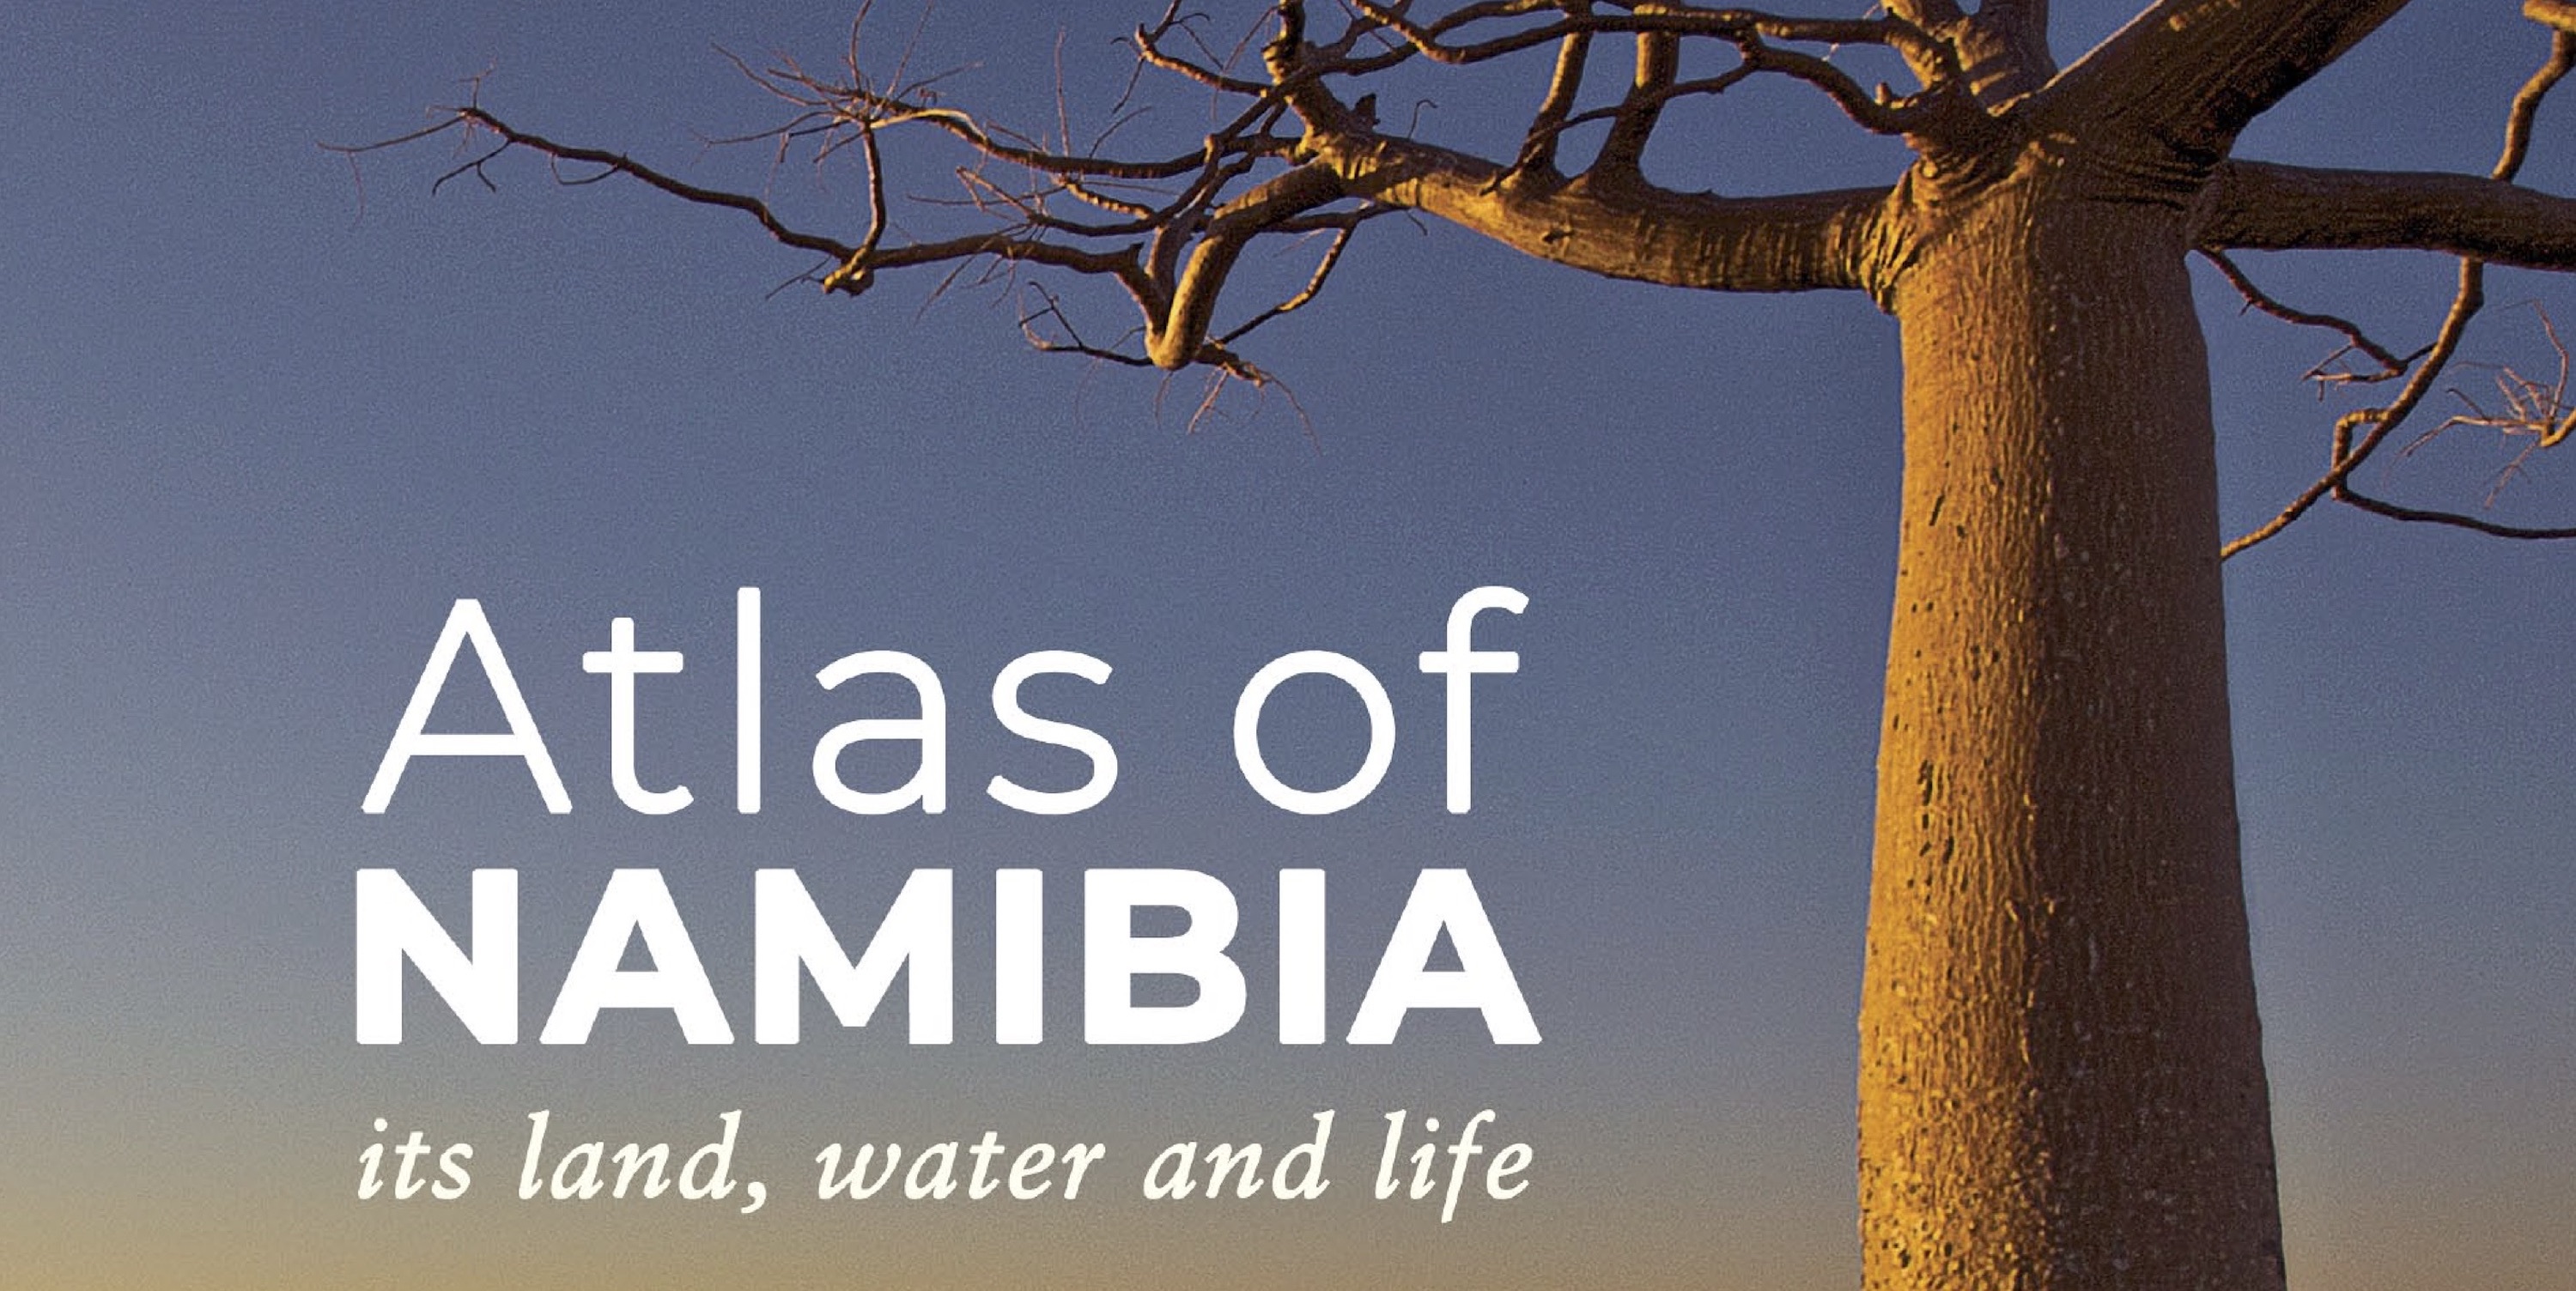 The front cover of the atlas of Namibia.